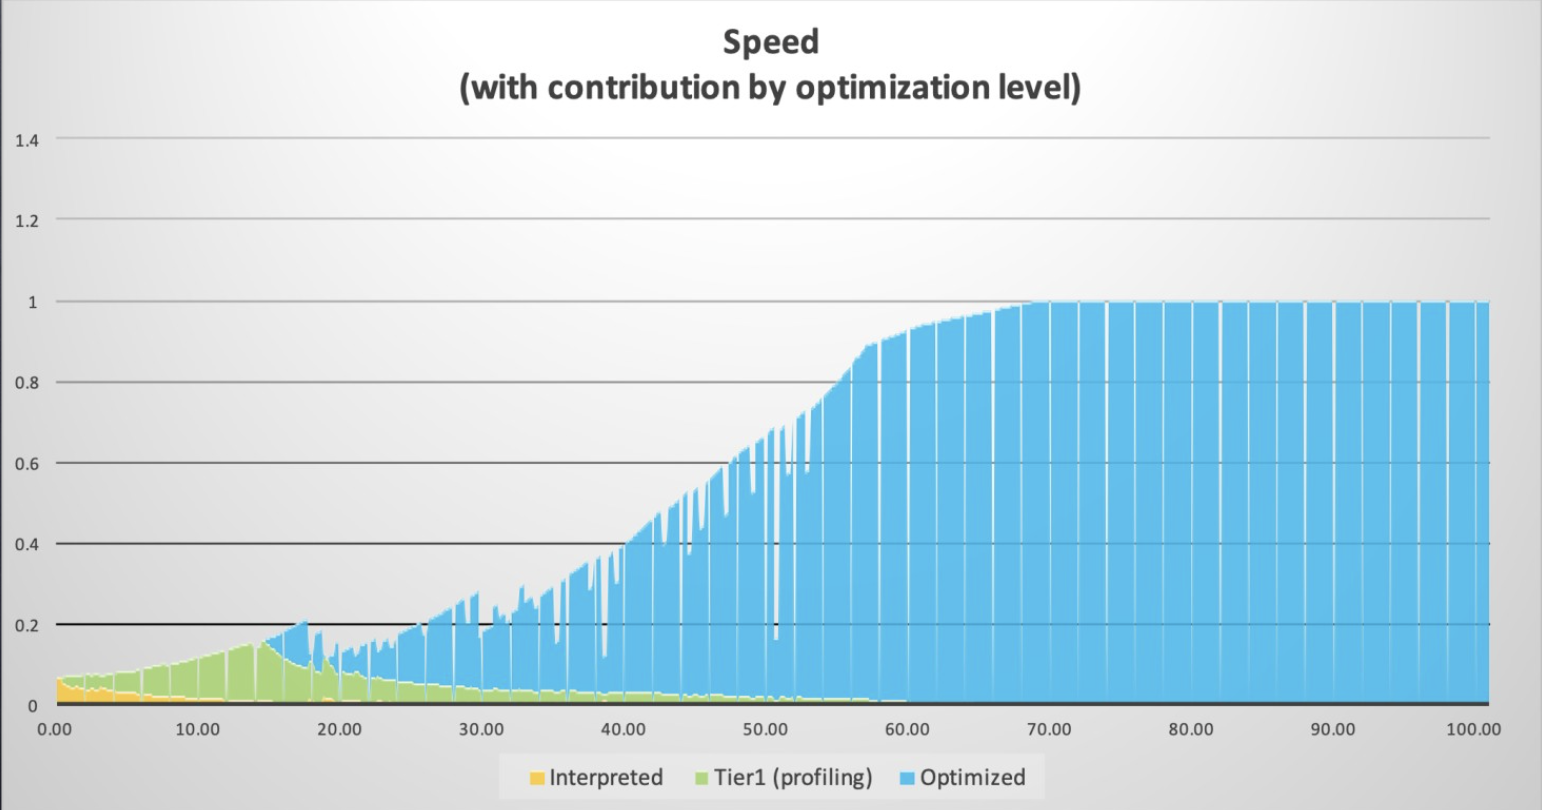 Chart showing the speed with contribution by optimization level